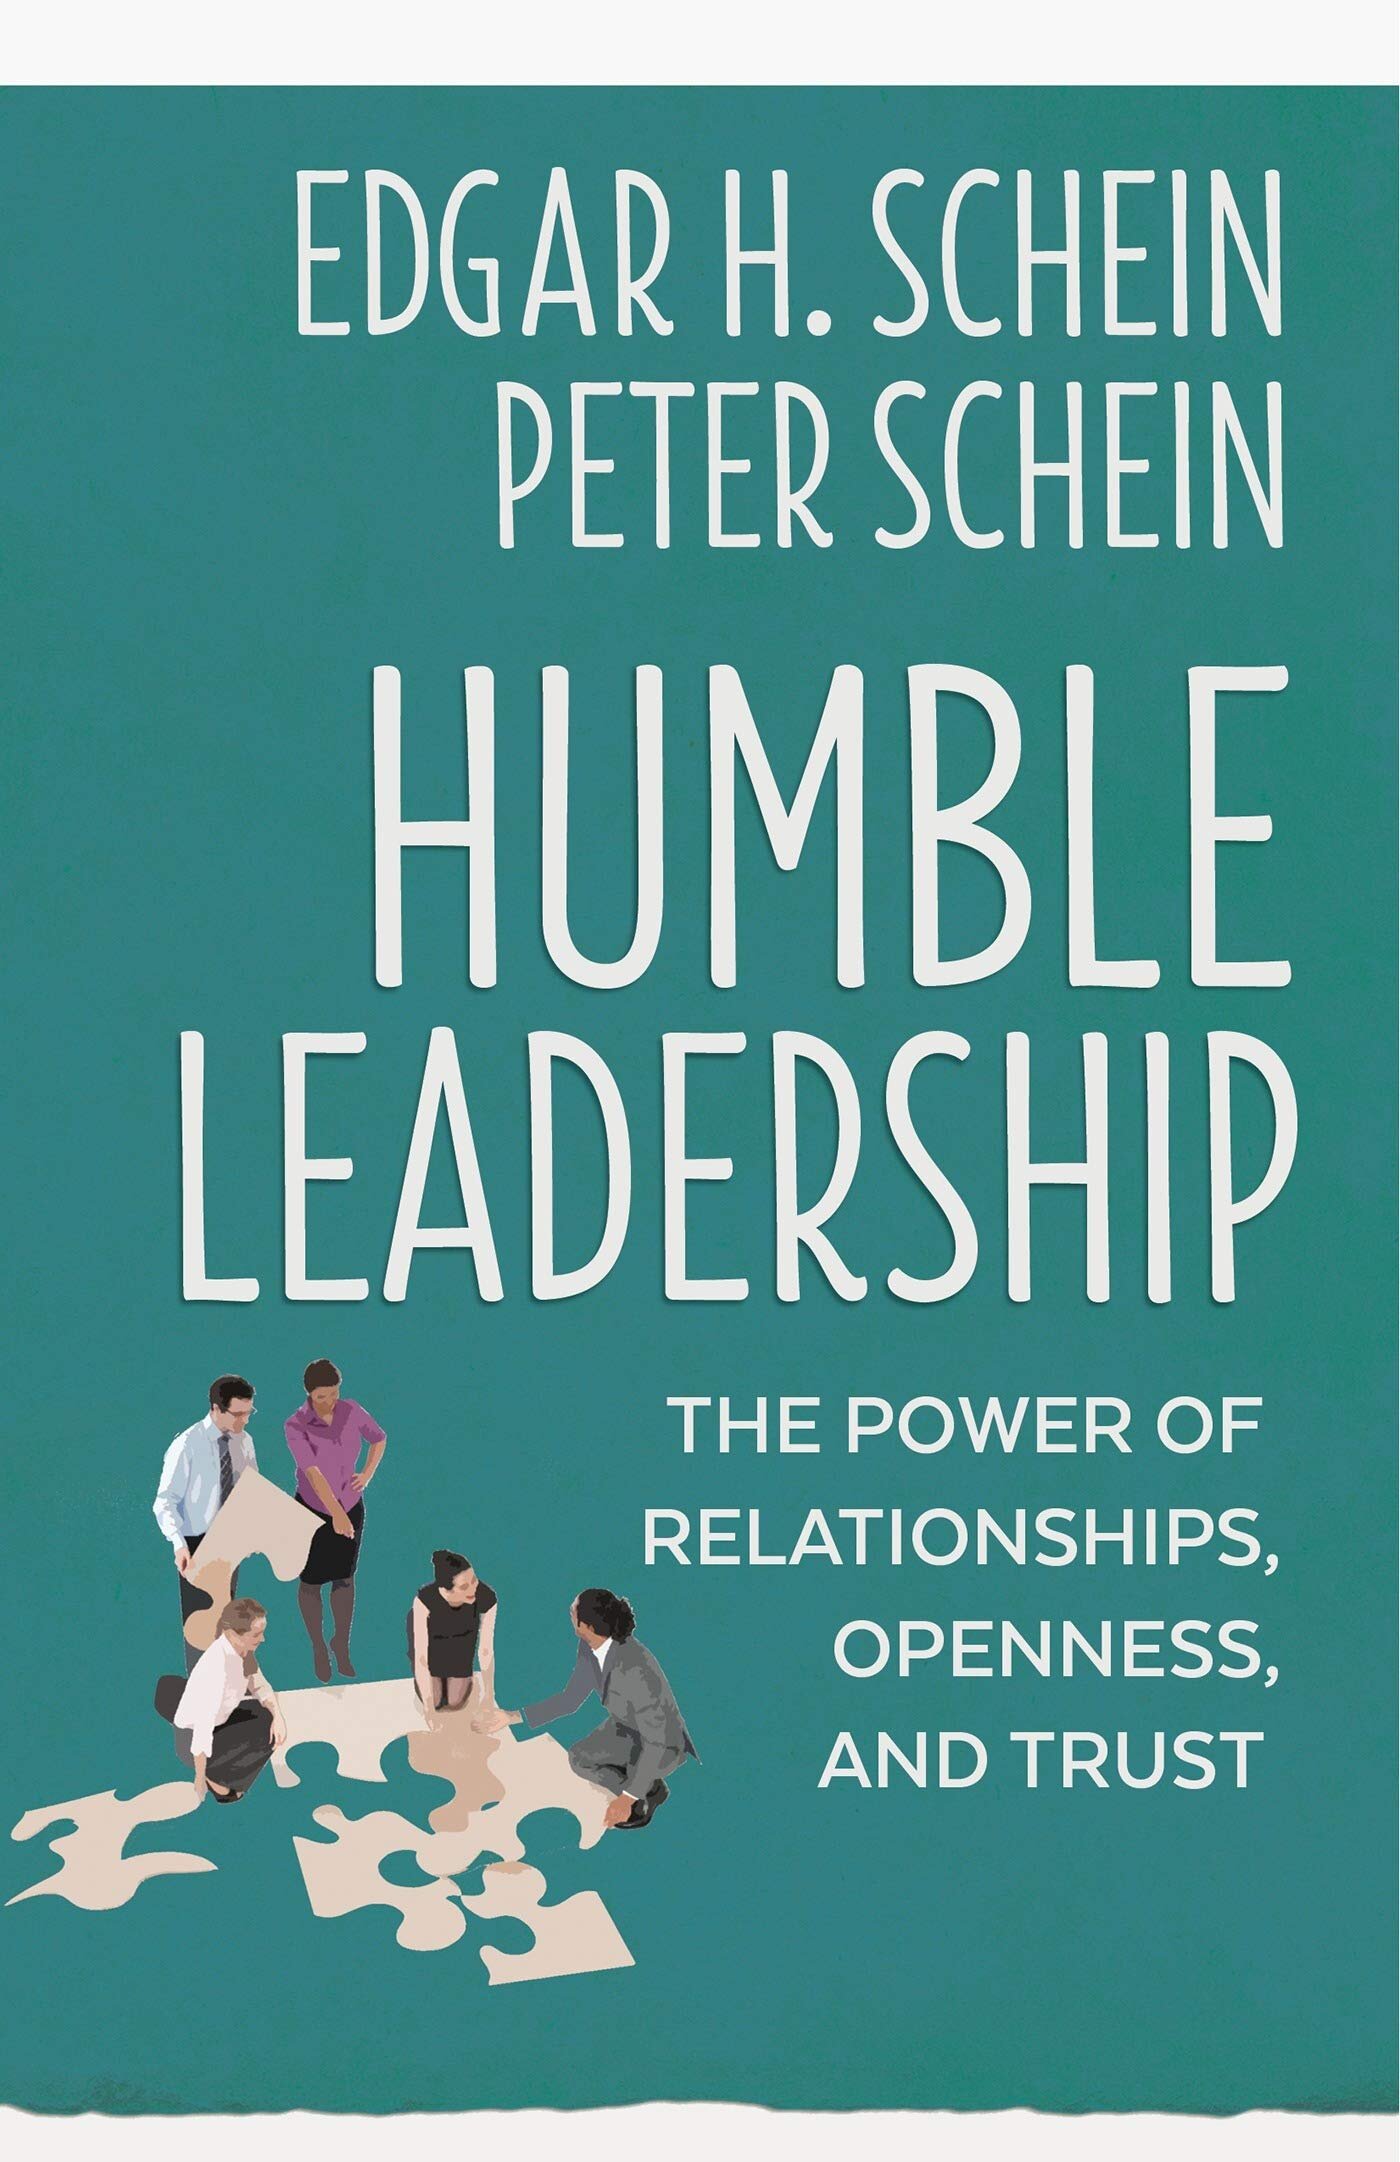 Humble Leadership: The Power of Relationships, Openness, and Trust - Edgar Schein, Peter Schein